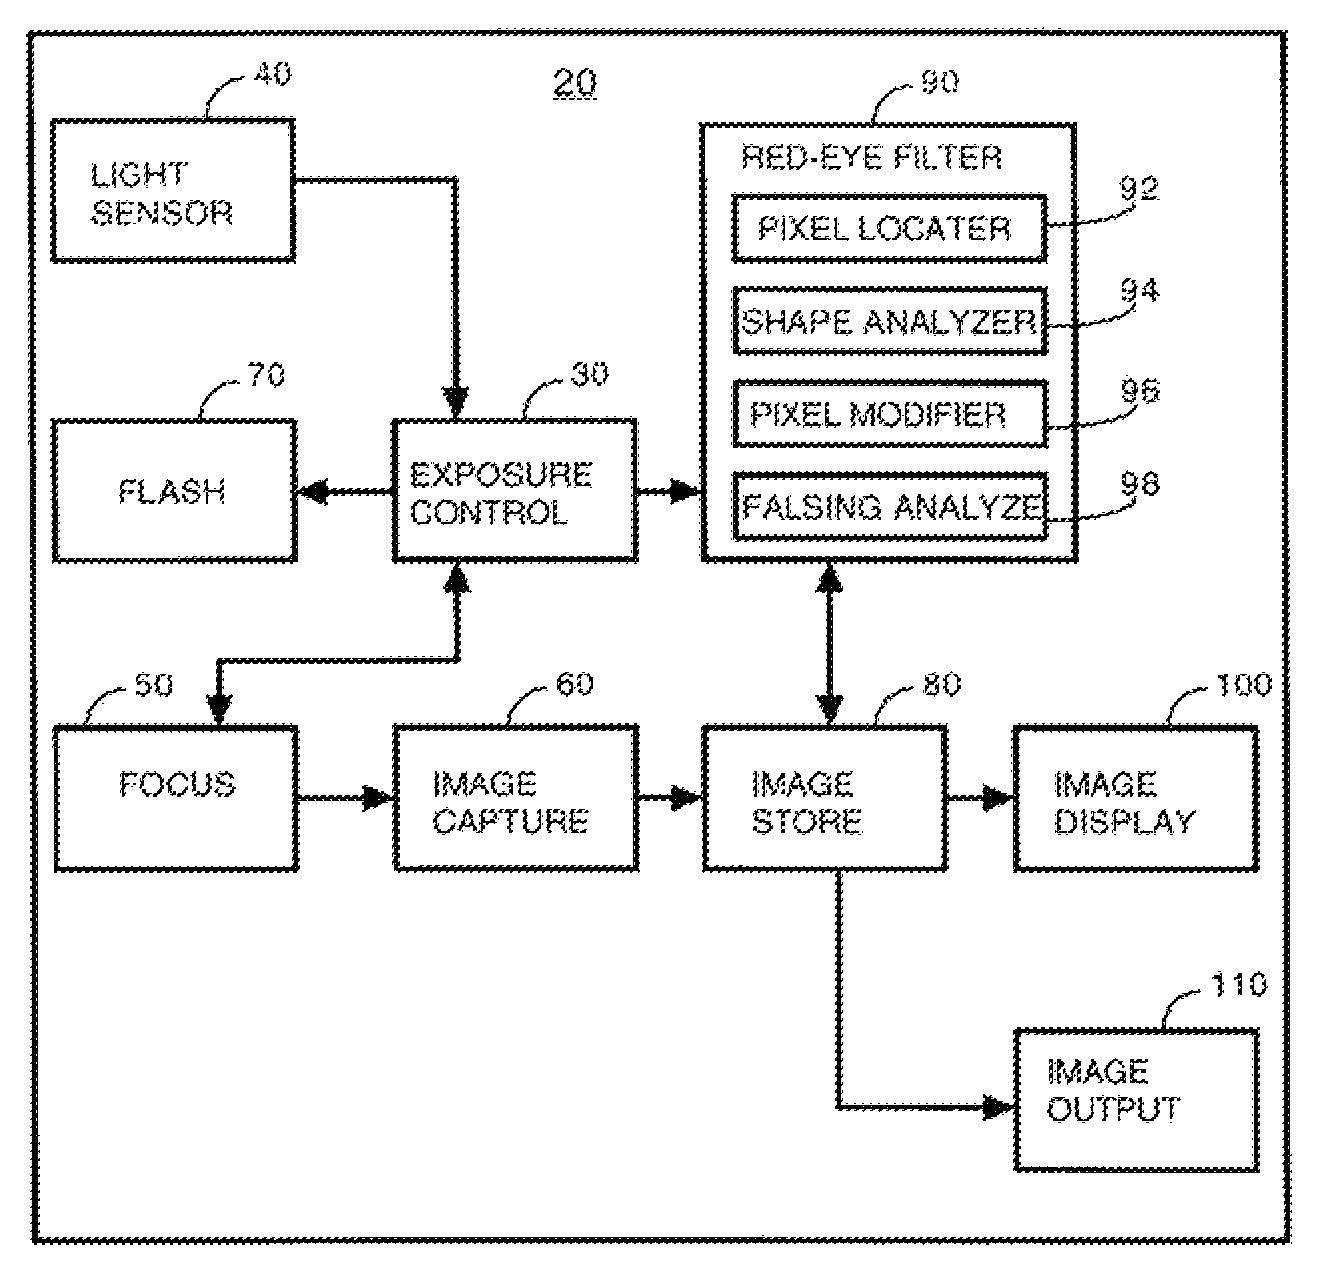 Red eye filter for in-camera digital image processing within a face of an acquired subject